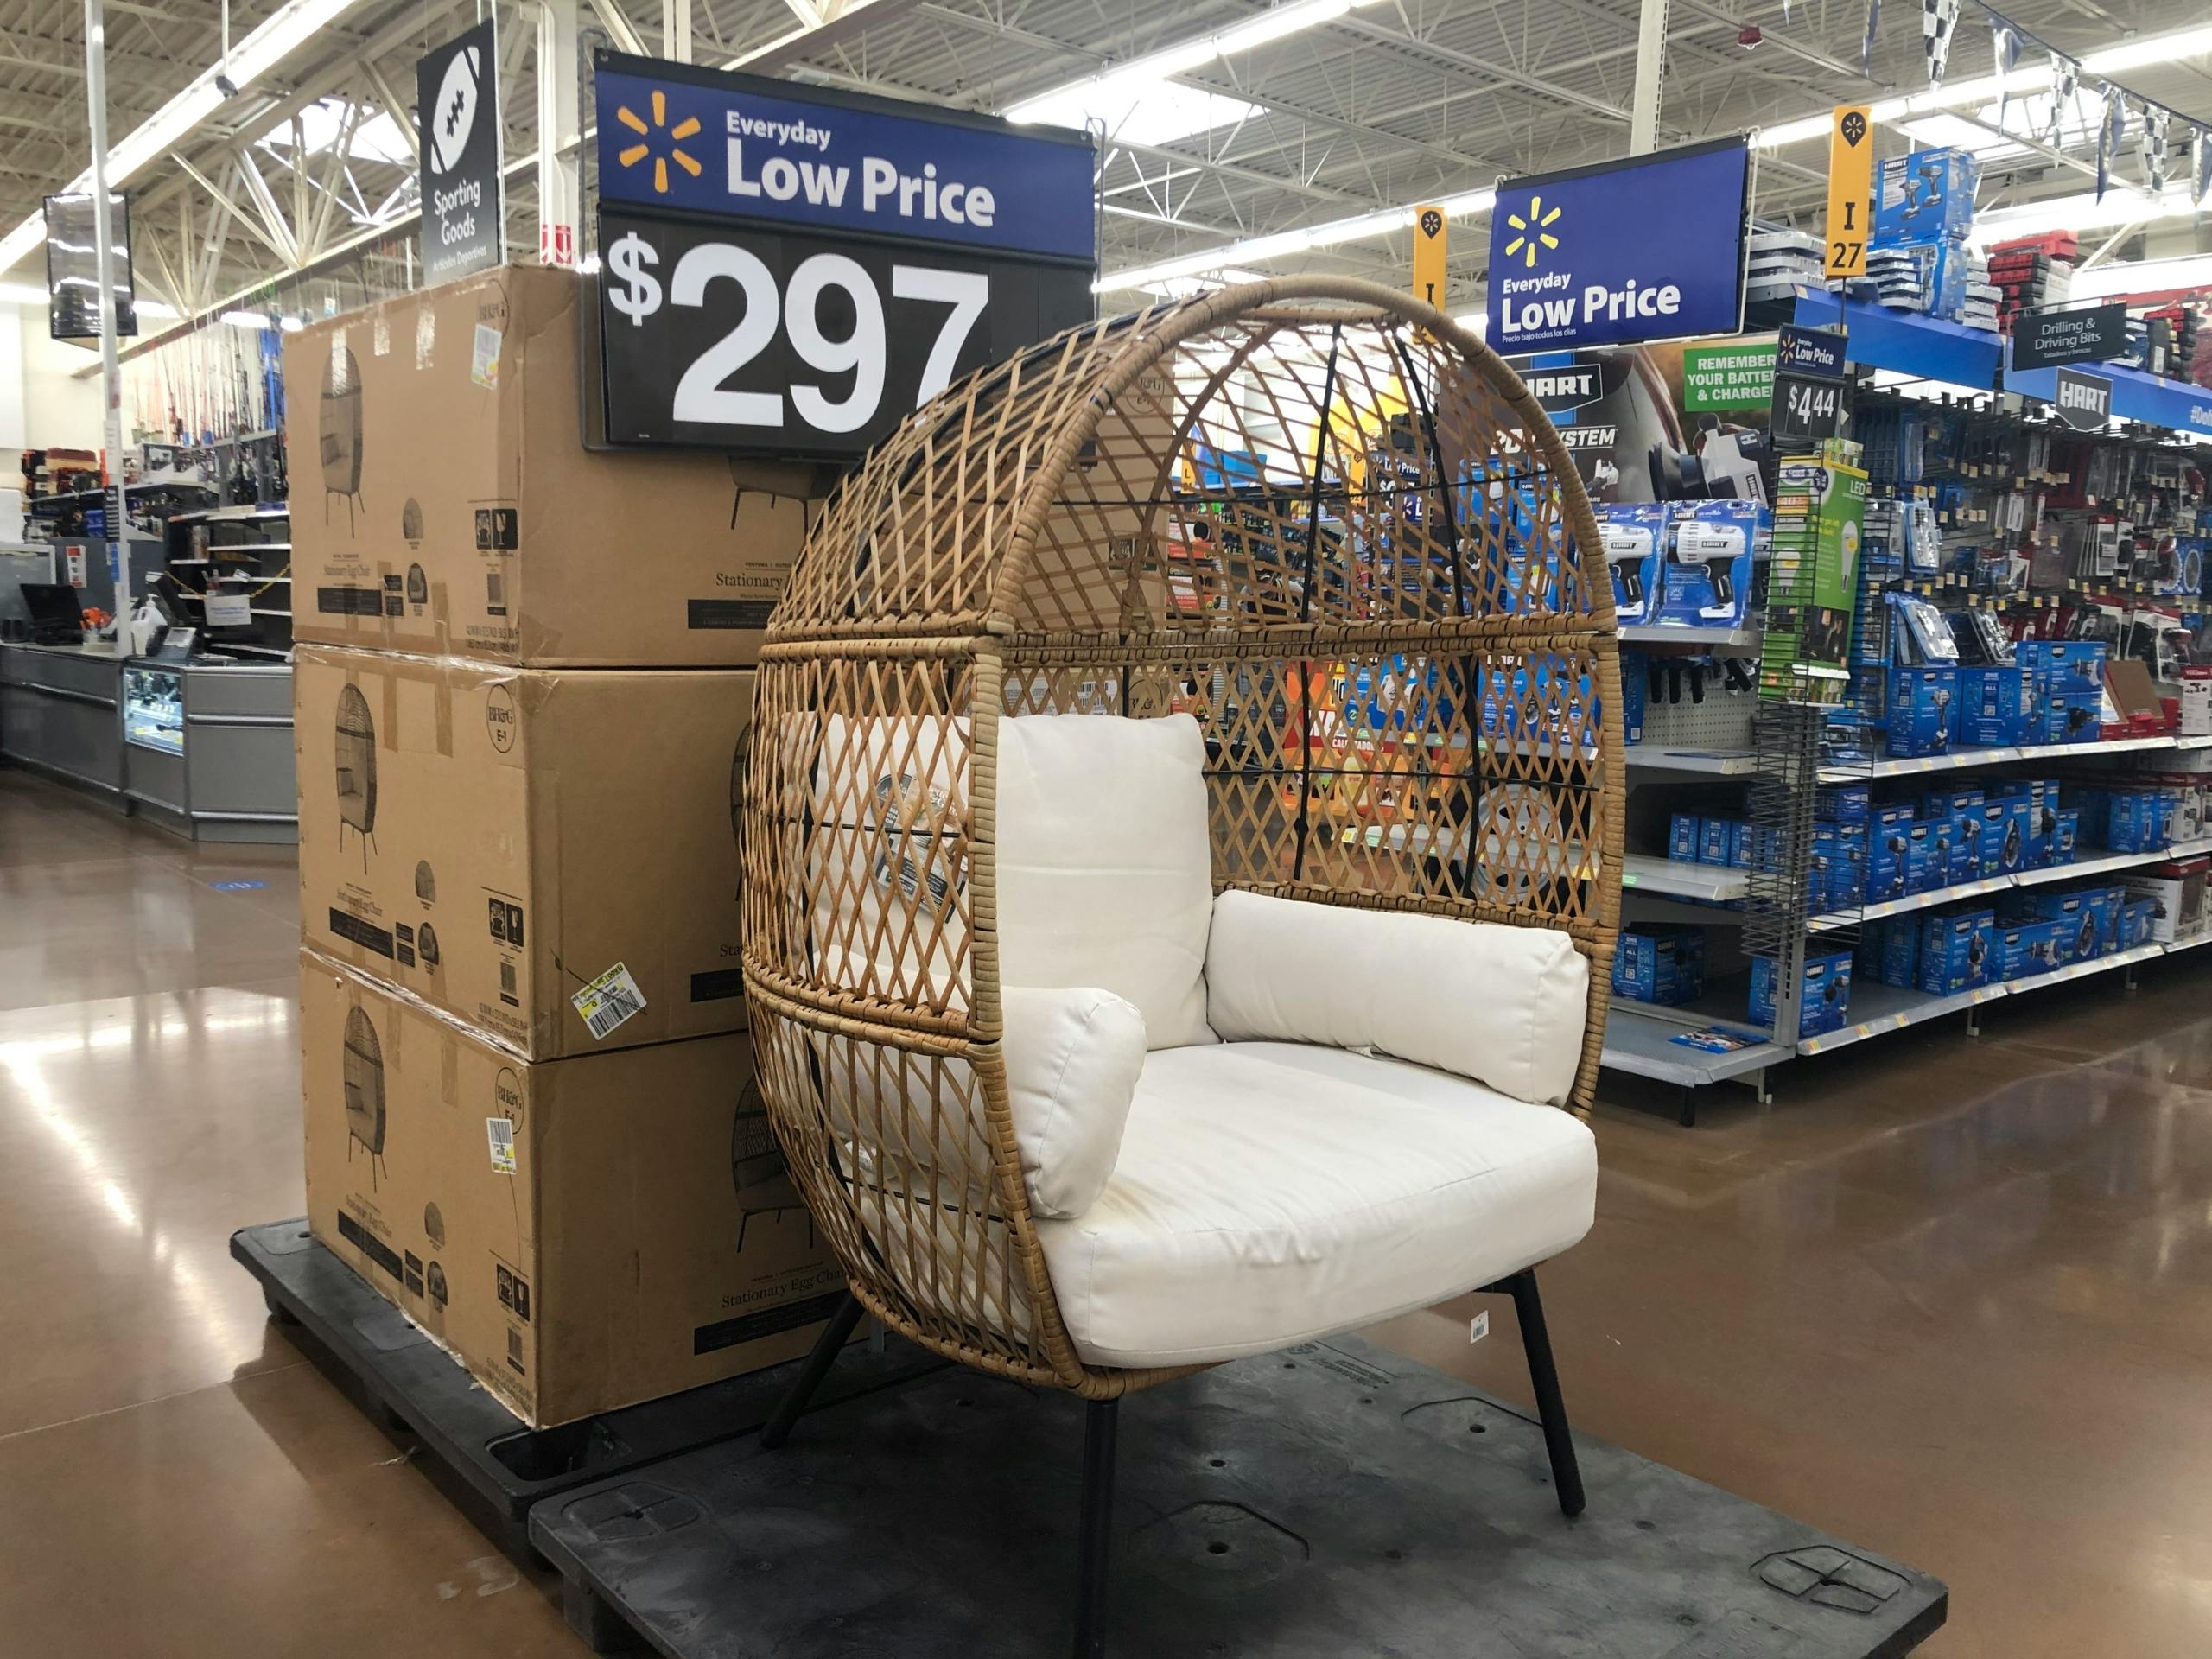 Patio Wicker Egg Chair Back In Stock At Walmart The Krazy Coupon Lady